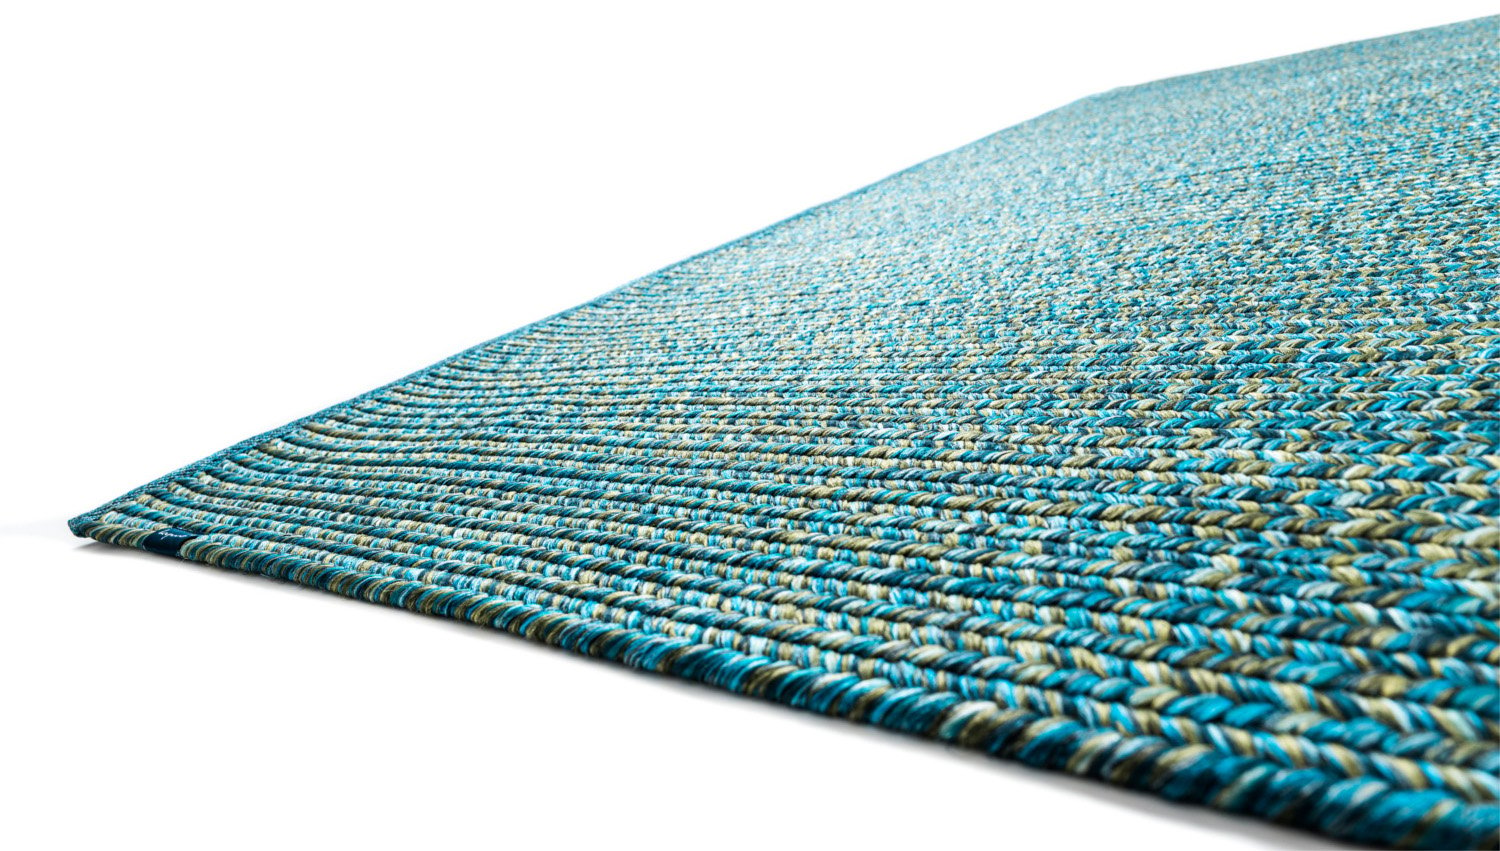 Colourful hand-braided outdoor carpet blue and green